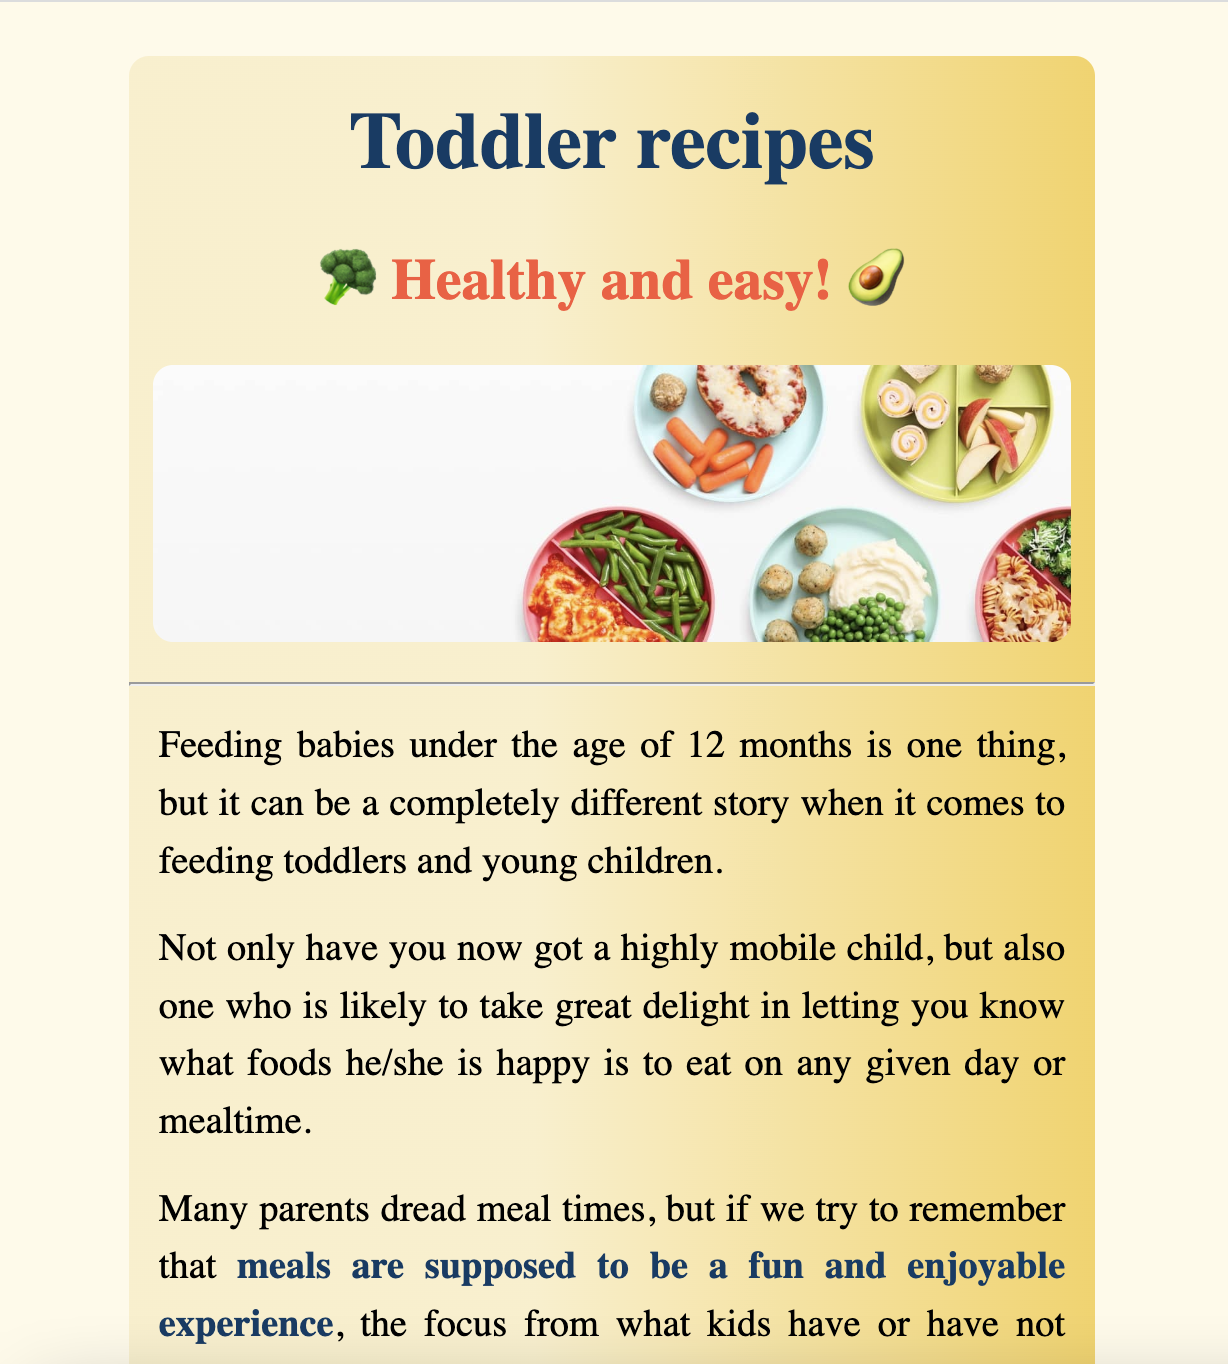 toddler recipes web page image